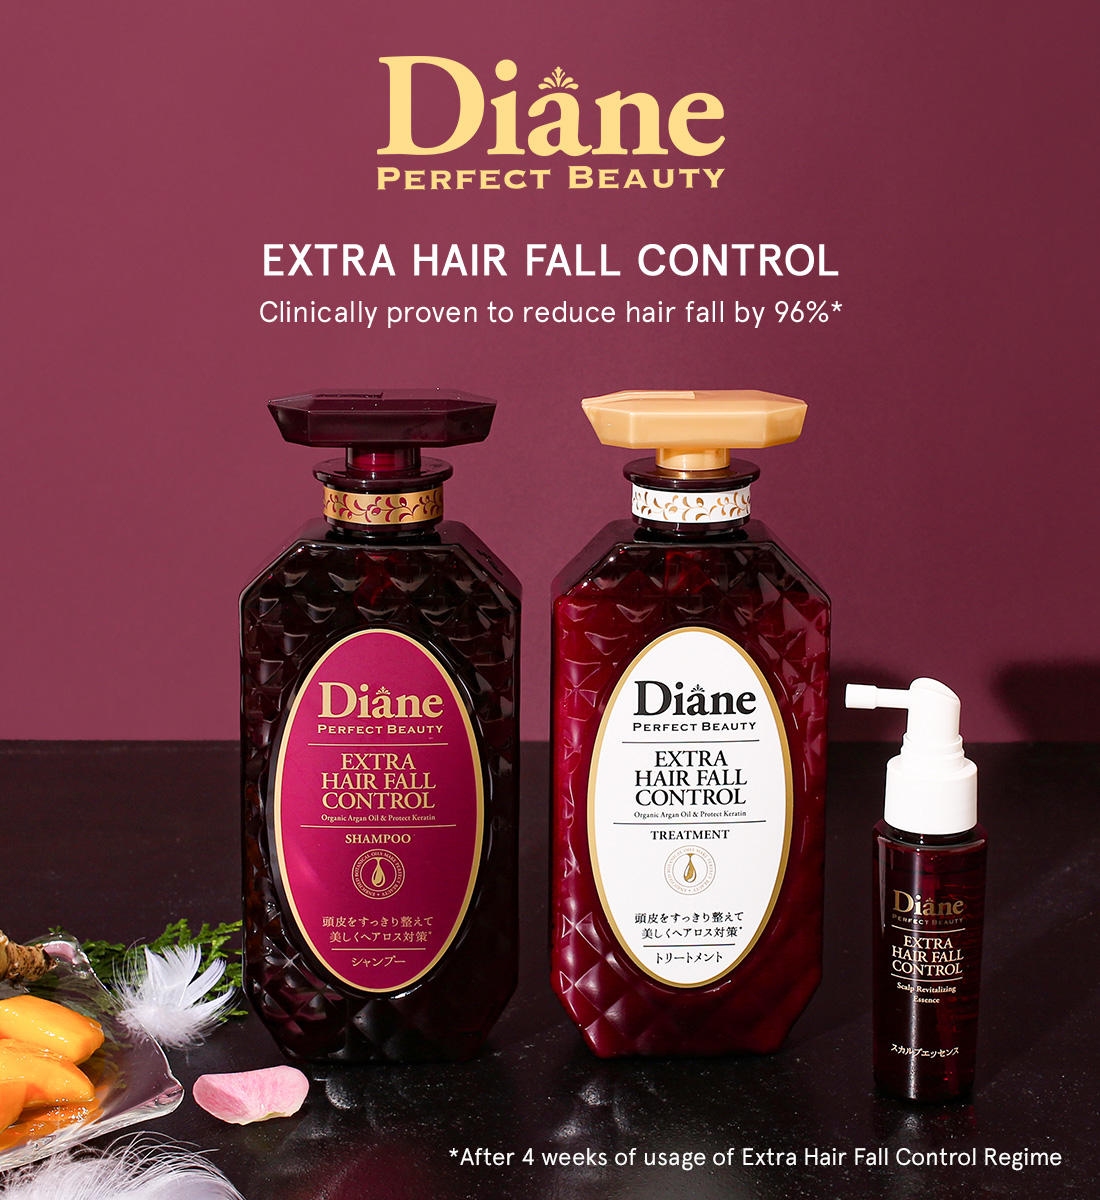 Diane Perfect Beauty | Extra Hair Fall Control | Clinically proven to reduce hair fall by 96%* | *After 4 weeks of usage of Extra Hair Fall Control Regime